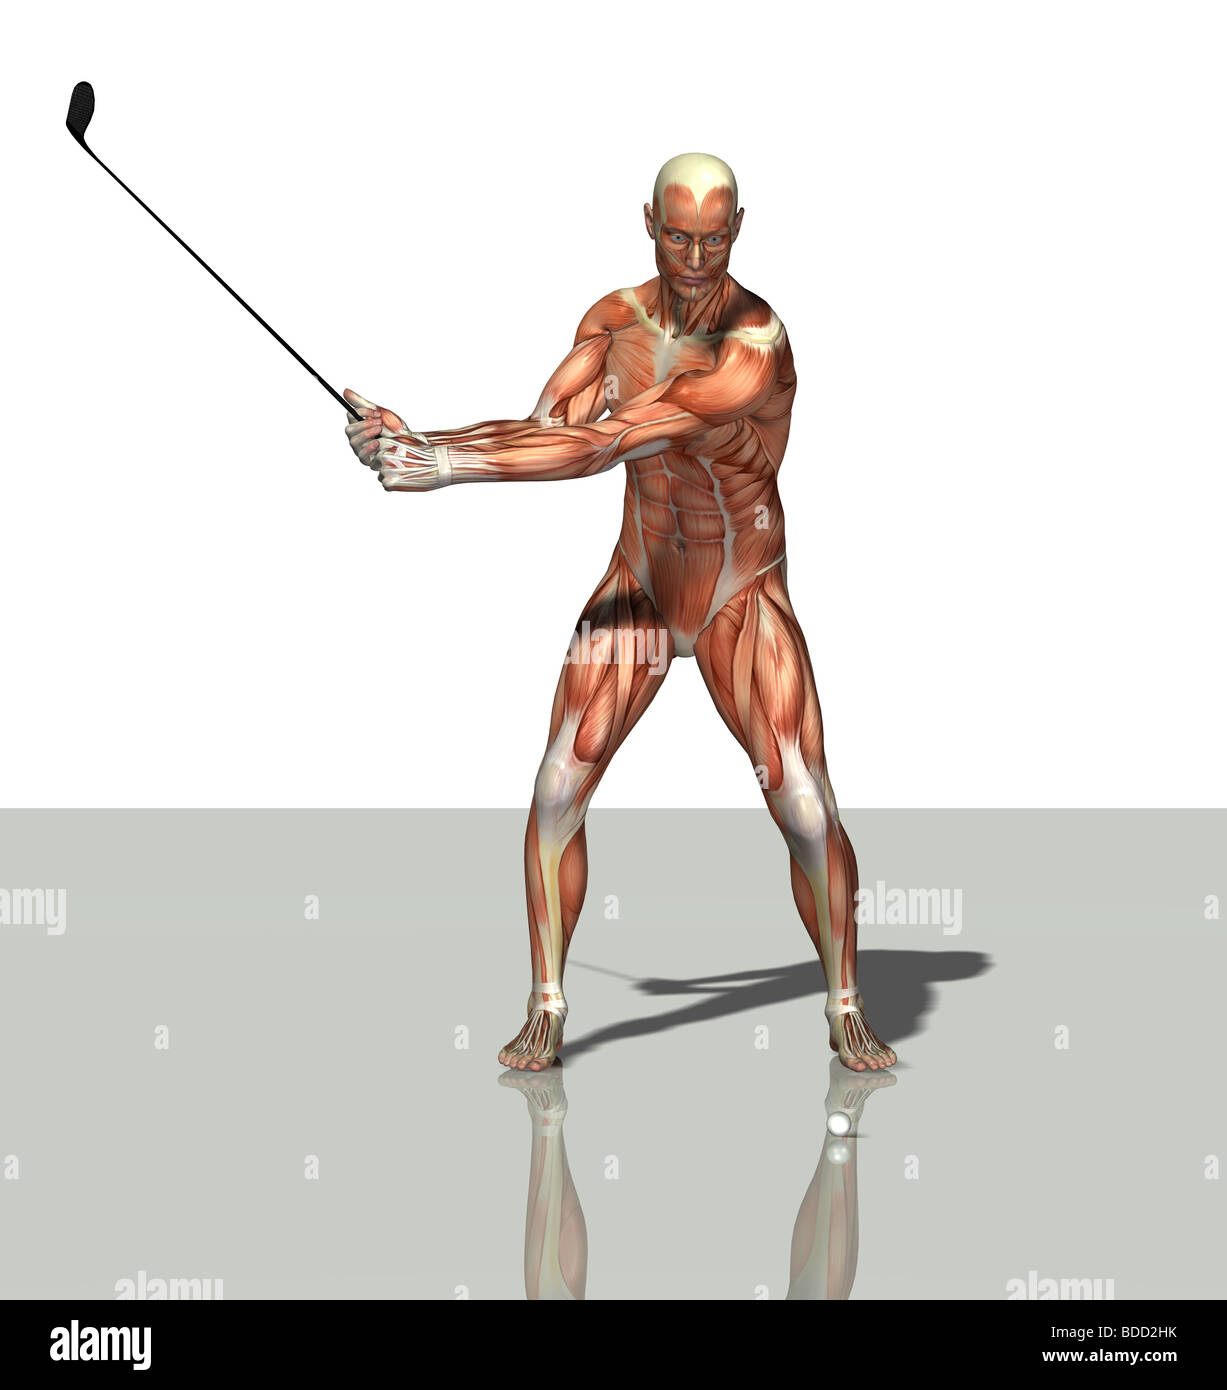 muscle man as golfer Stock Photo